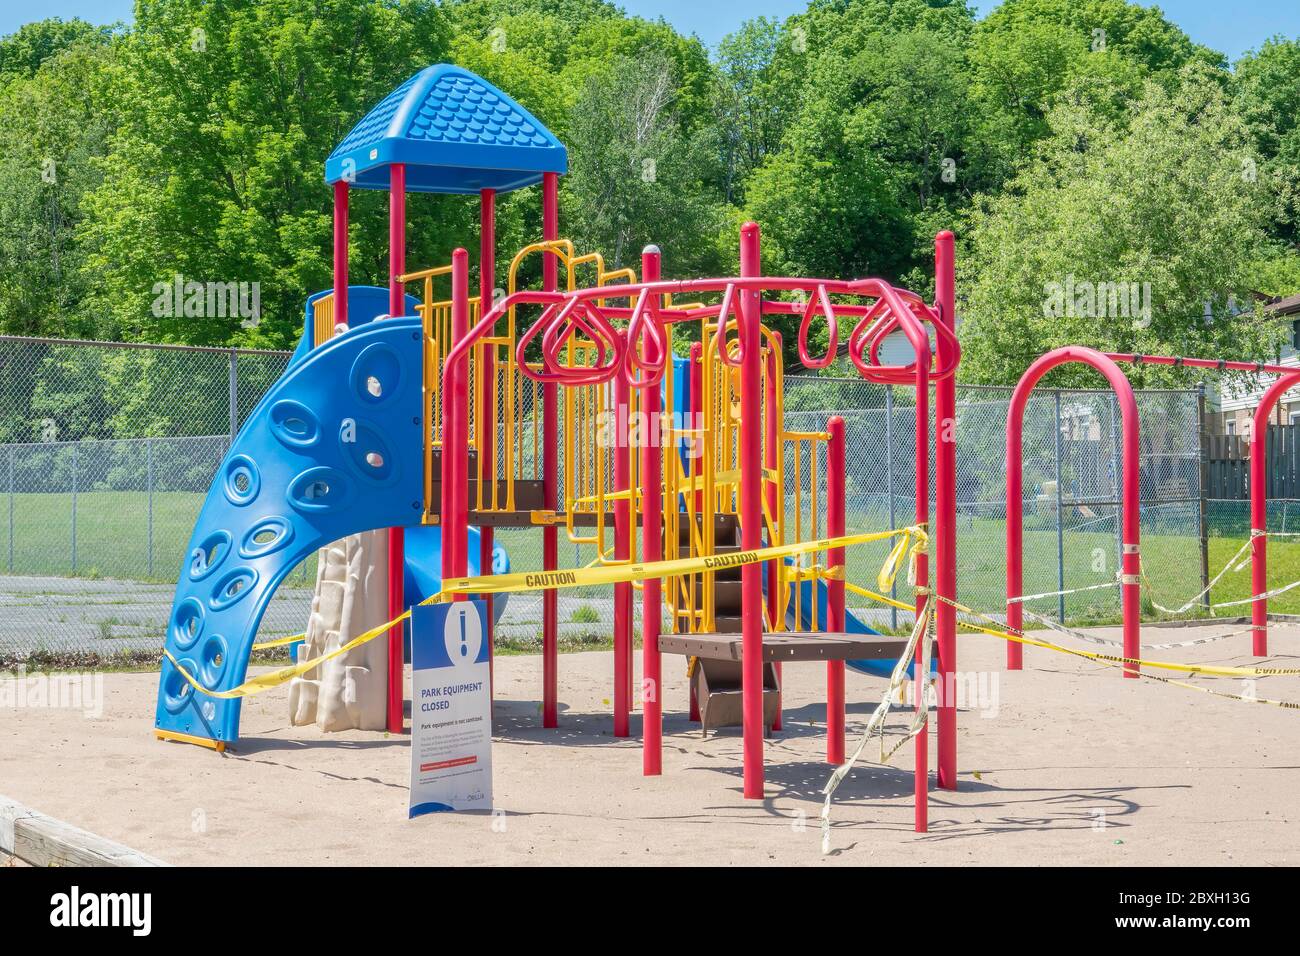 Empty playground closed for use due to safety concerns over covid-19 in Orillia Ontario Canada. Stock Photo